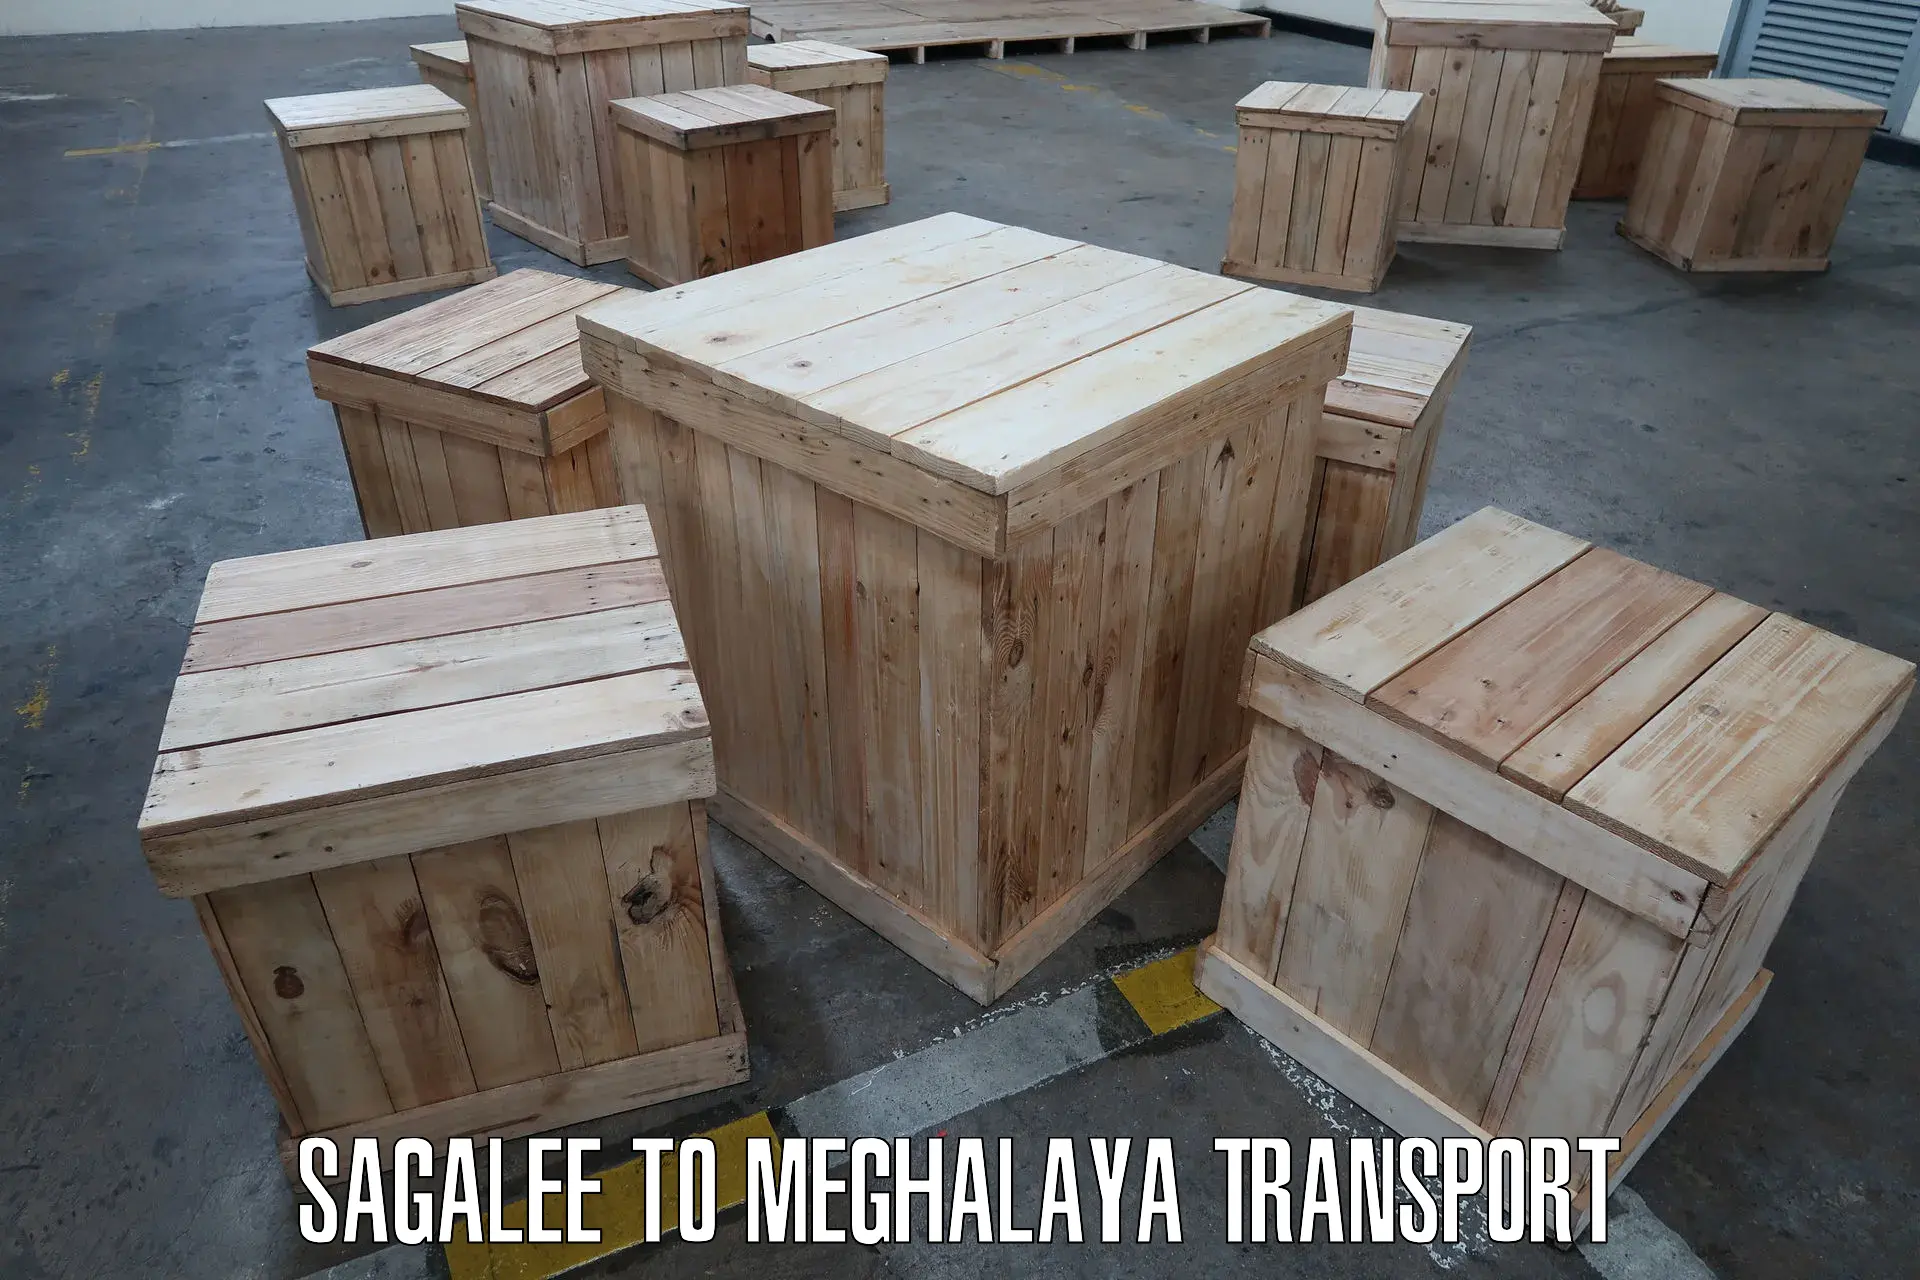 Delivery service Sagalee to Meghalaya